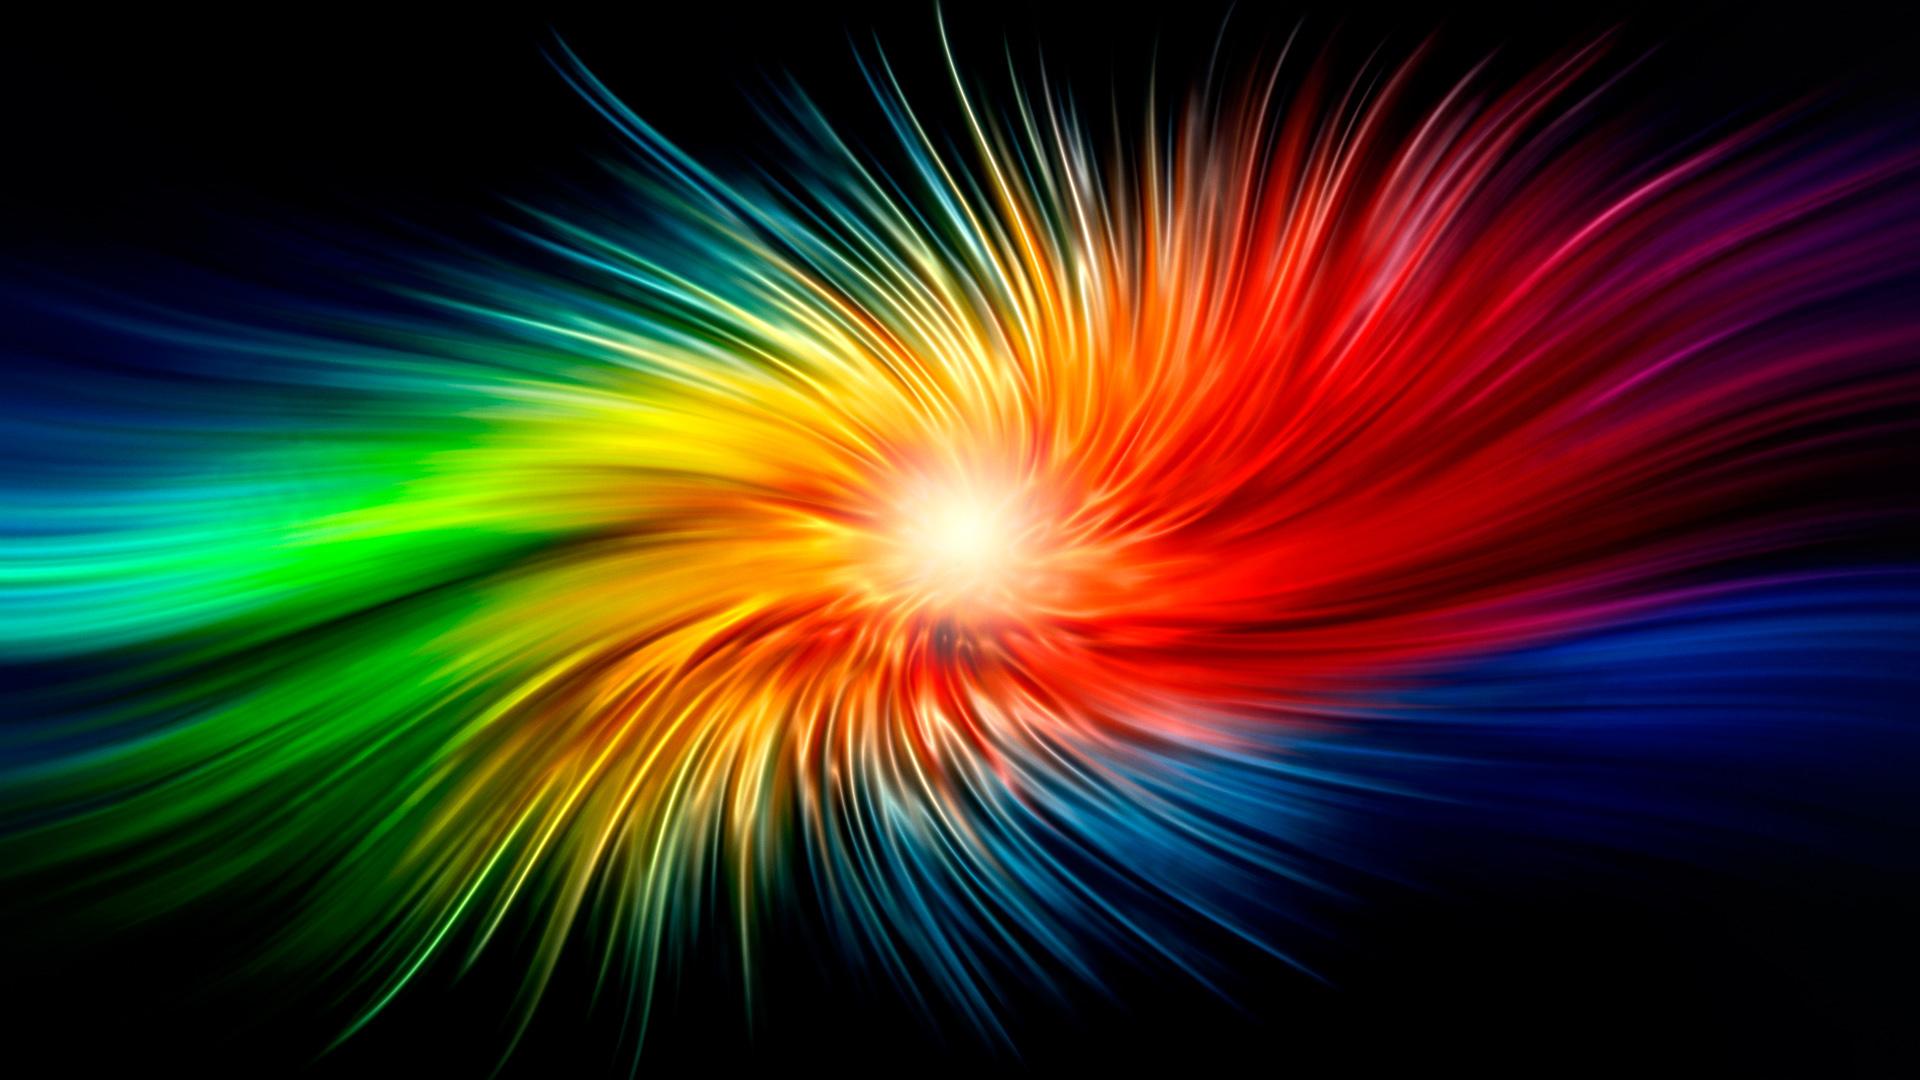 awesome colorful backgrounds 2921 hd wallpapersjpg